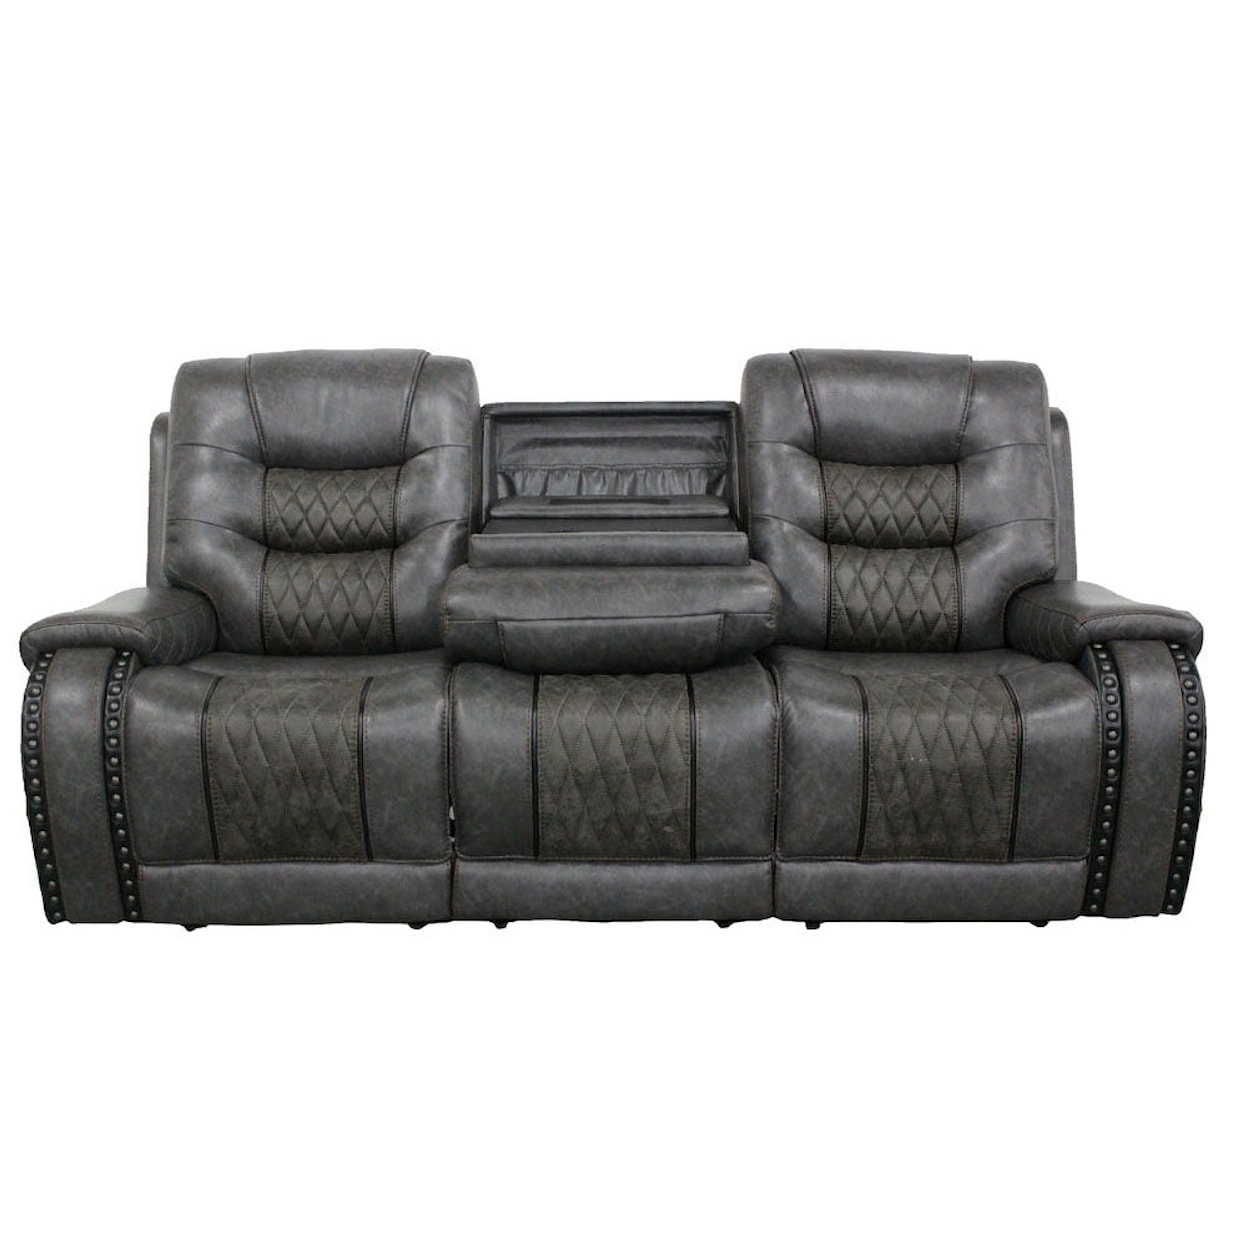 Paramount Living Outlaw - Stallion Power Drop Down Console Sofa